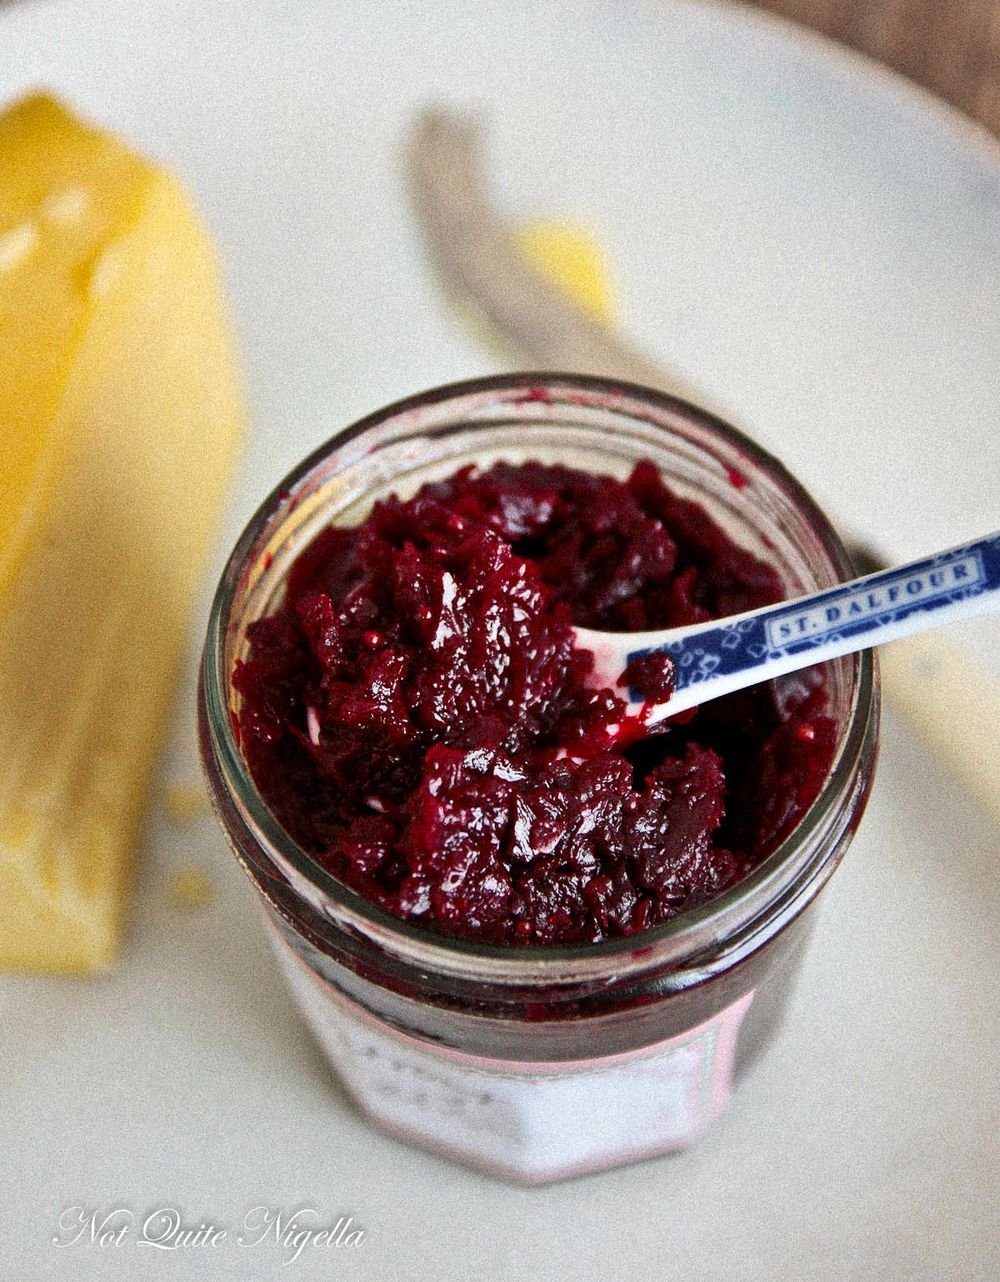 Spiced Beetroot Relish